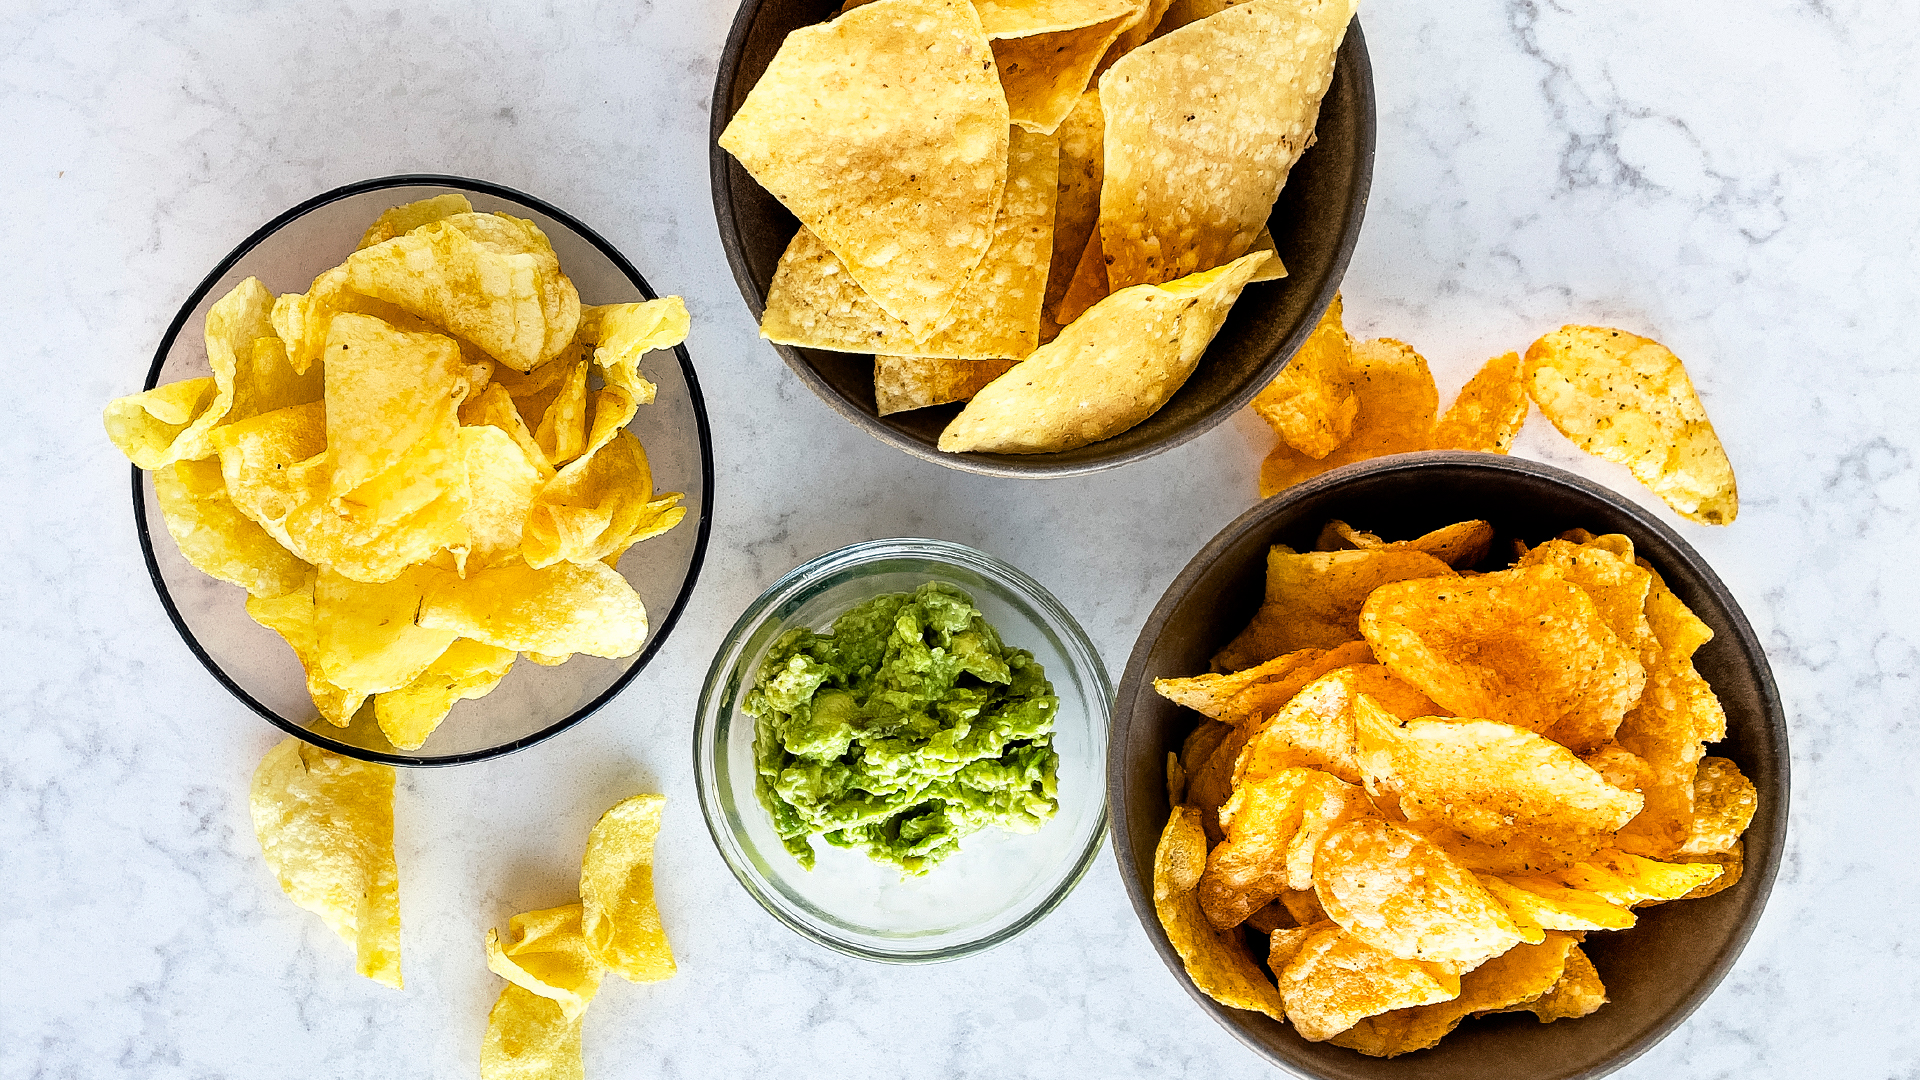 Sour cream and chive caviar chips